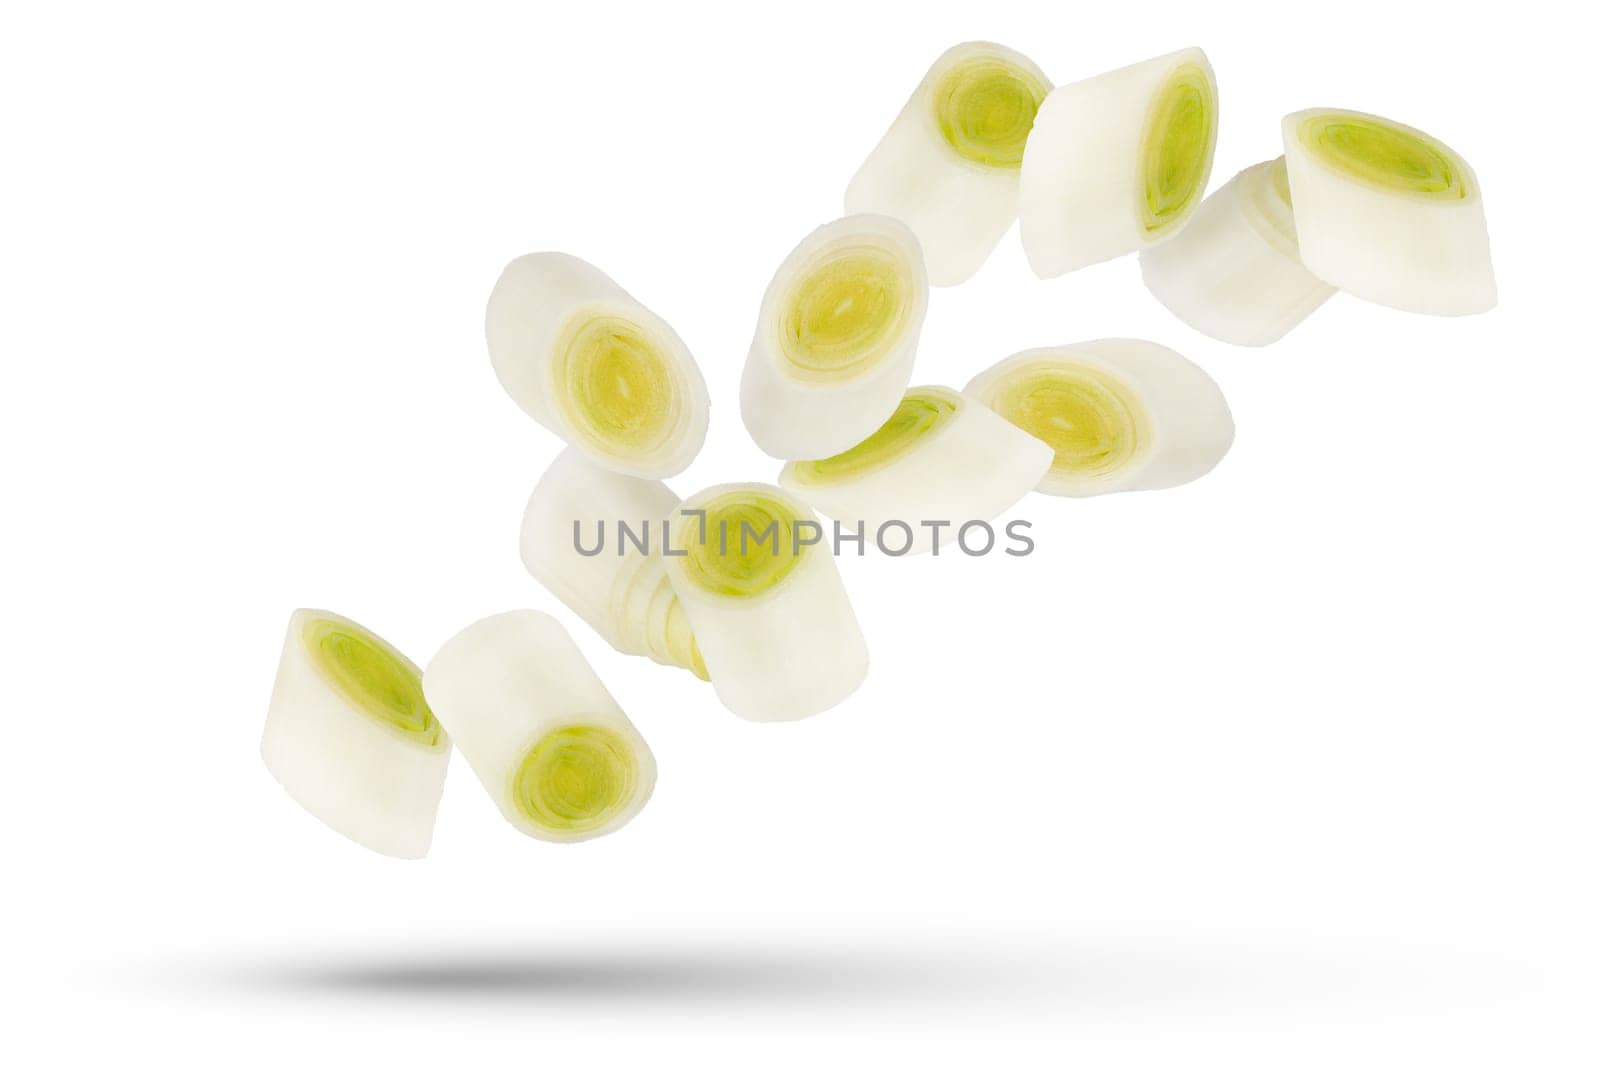 Leek slices. White and green onion slices isolated on white background. A group of leek slices of different sizes and shapes scatter in different directions. High quality photo